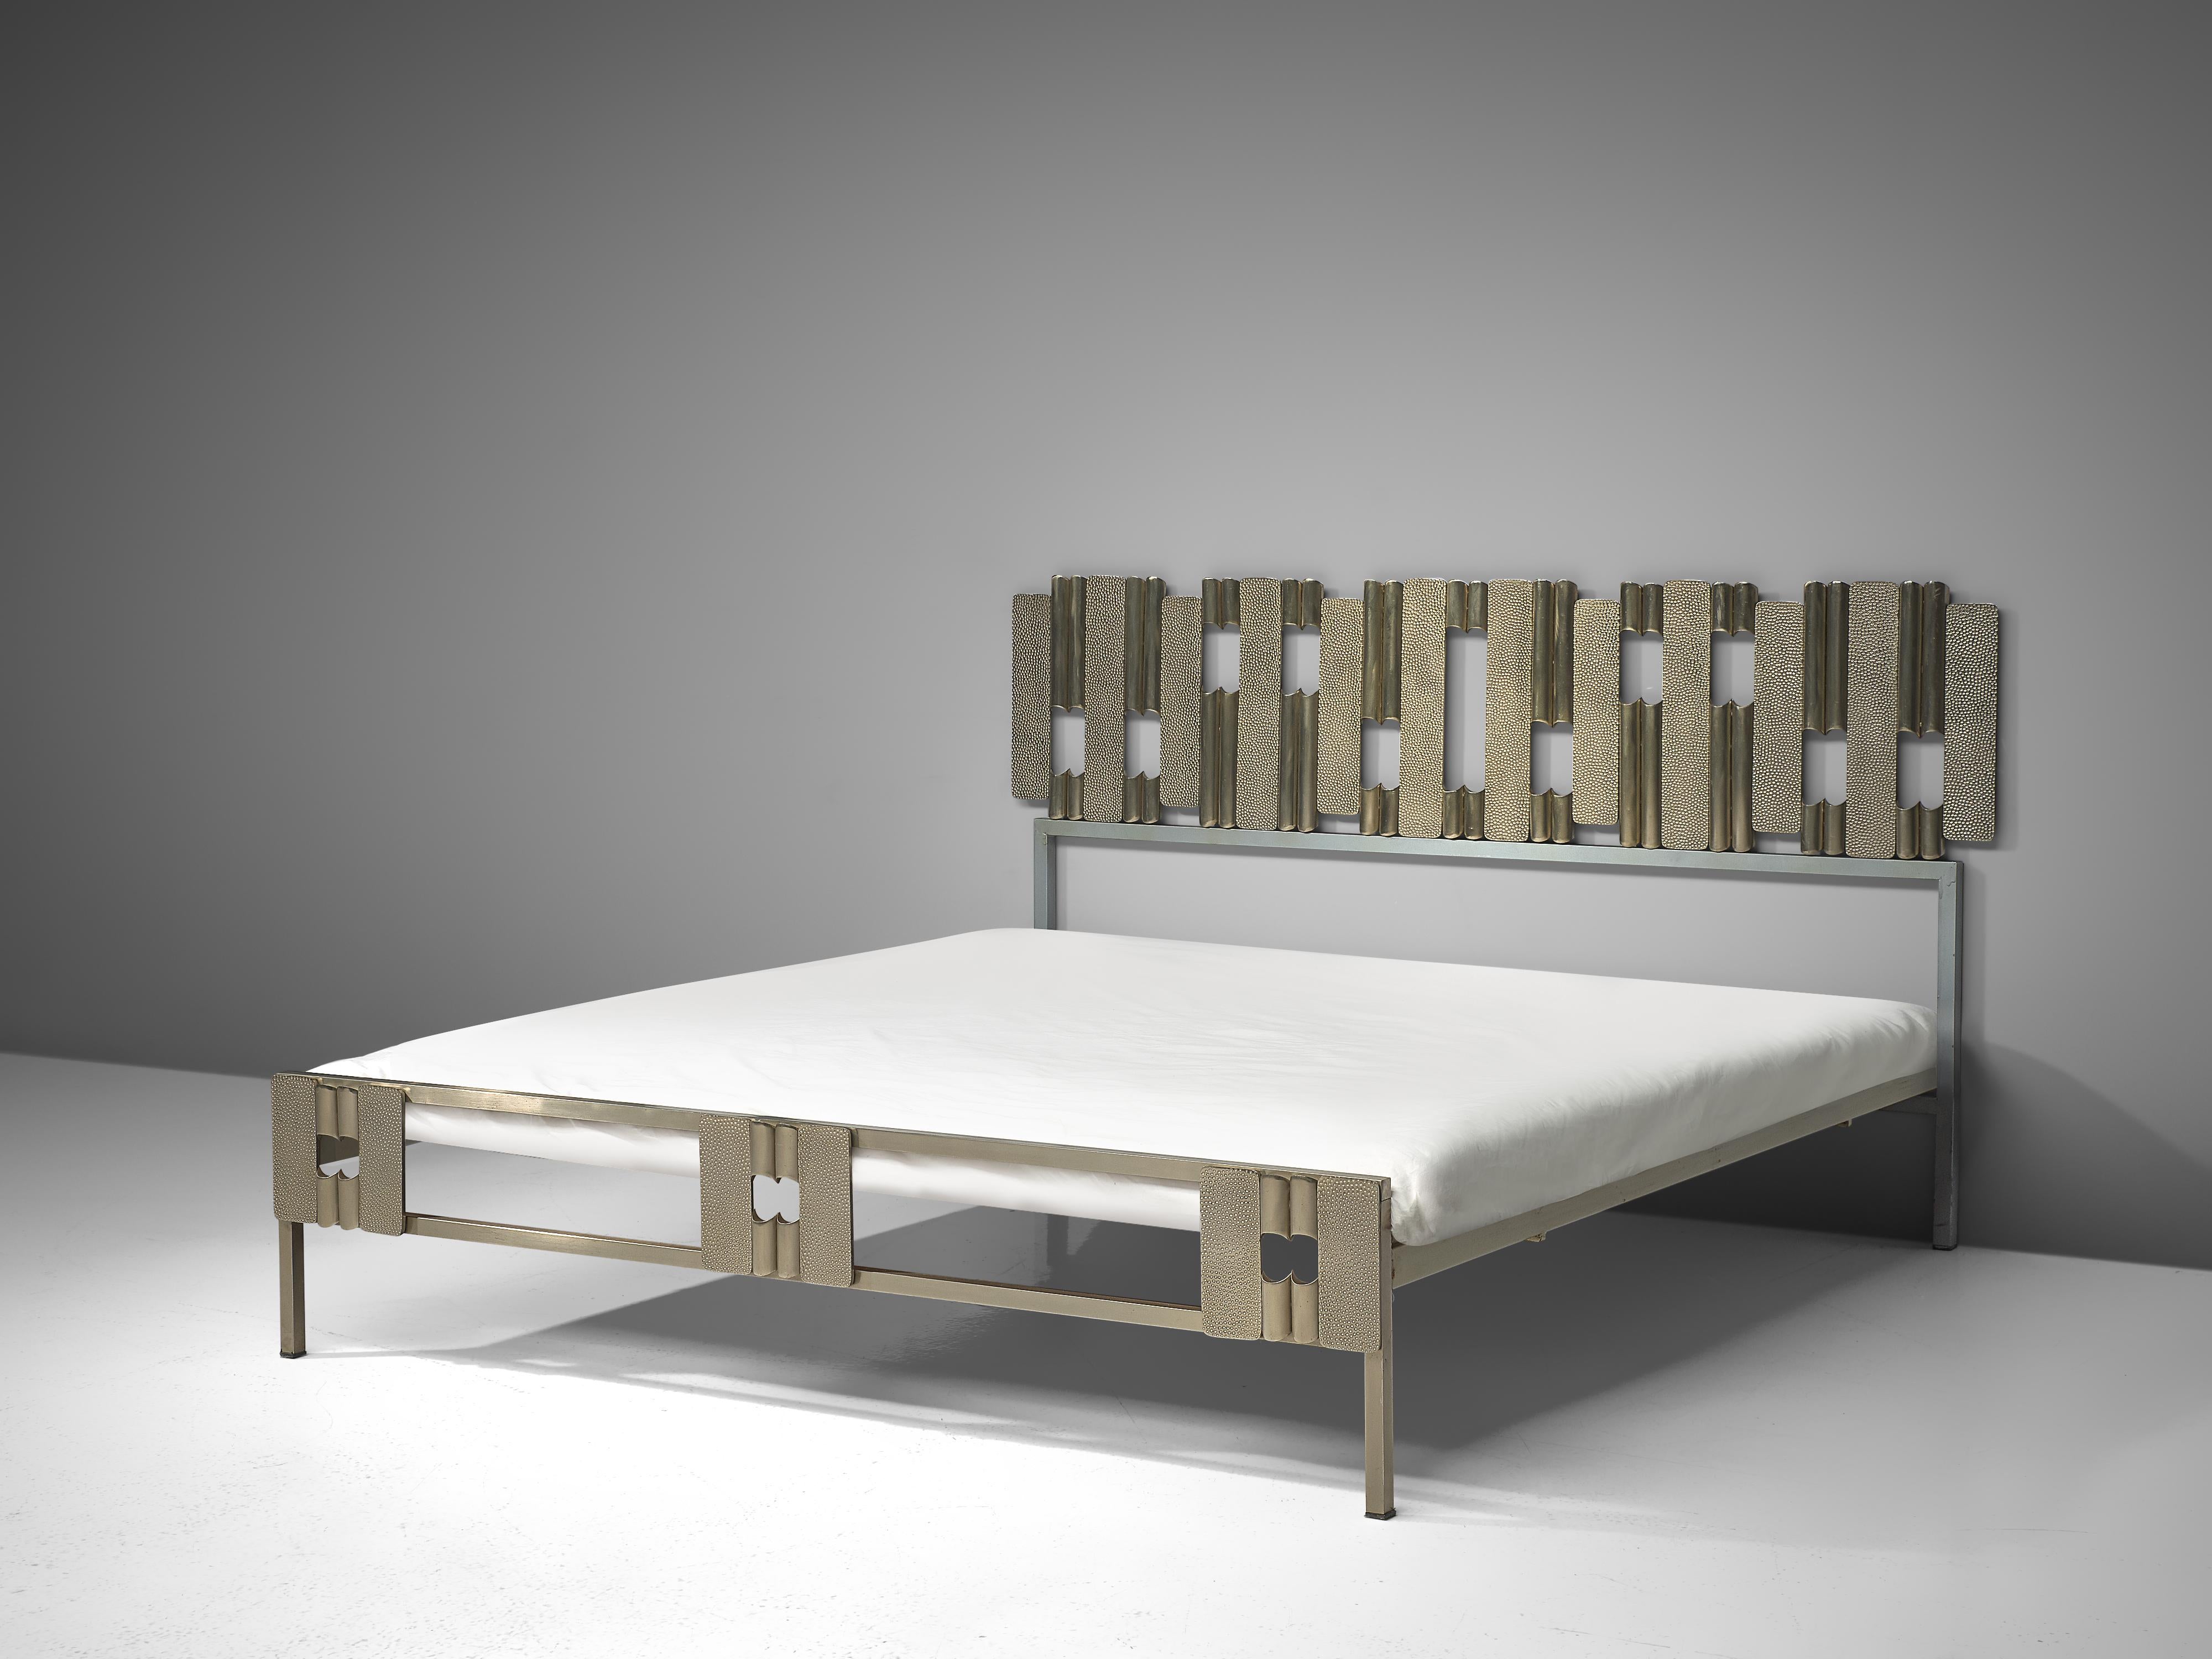 Luciano Frigerio, bed with headboard, steel, Italy, 1970s

Beautiful bed by Italian sculptor and artist Luciano Frigerio. This Brutalist inspired bed features a stunning headboard consisting of a variety in vertical slats. These slats are both